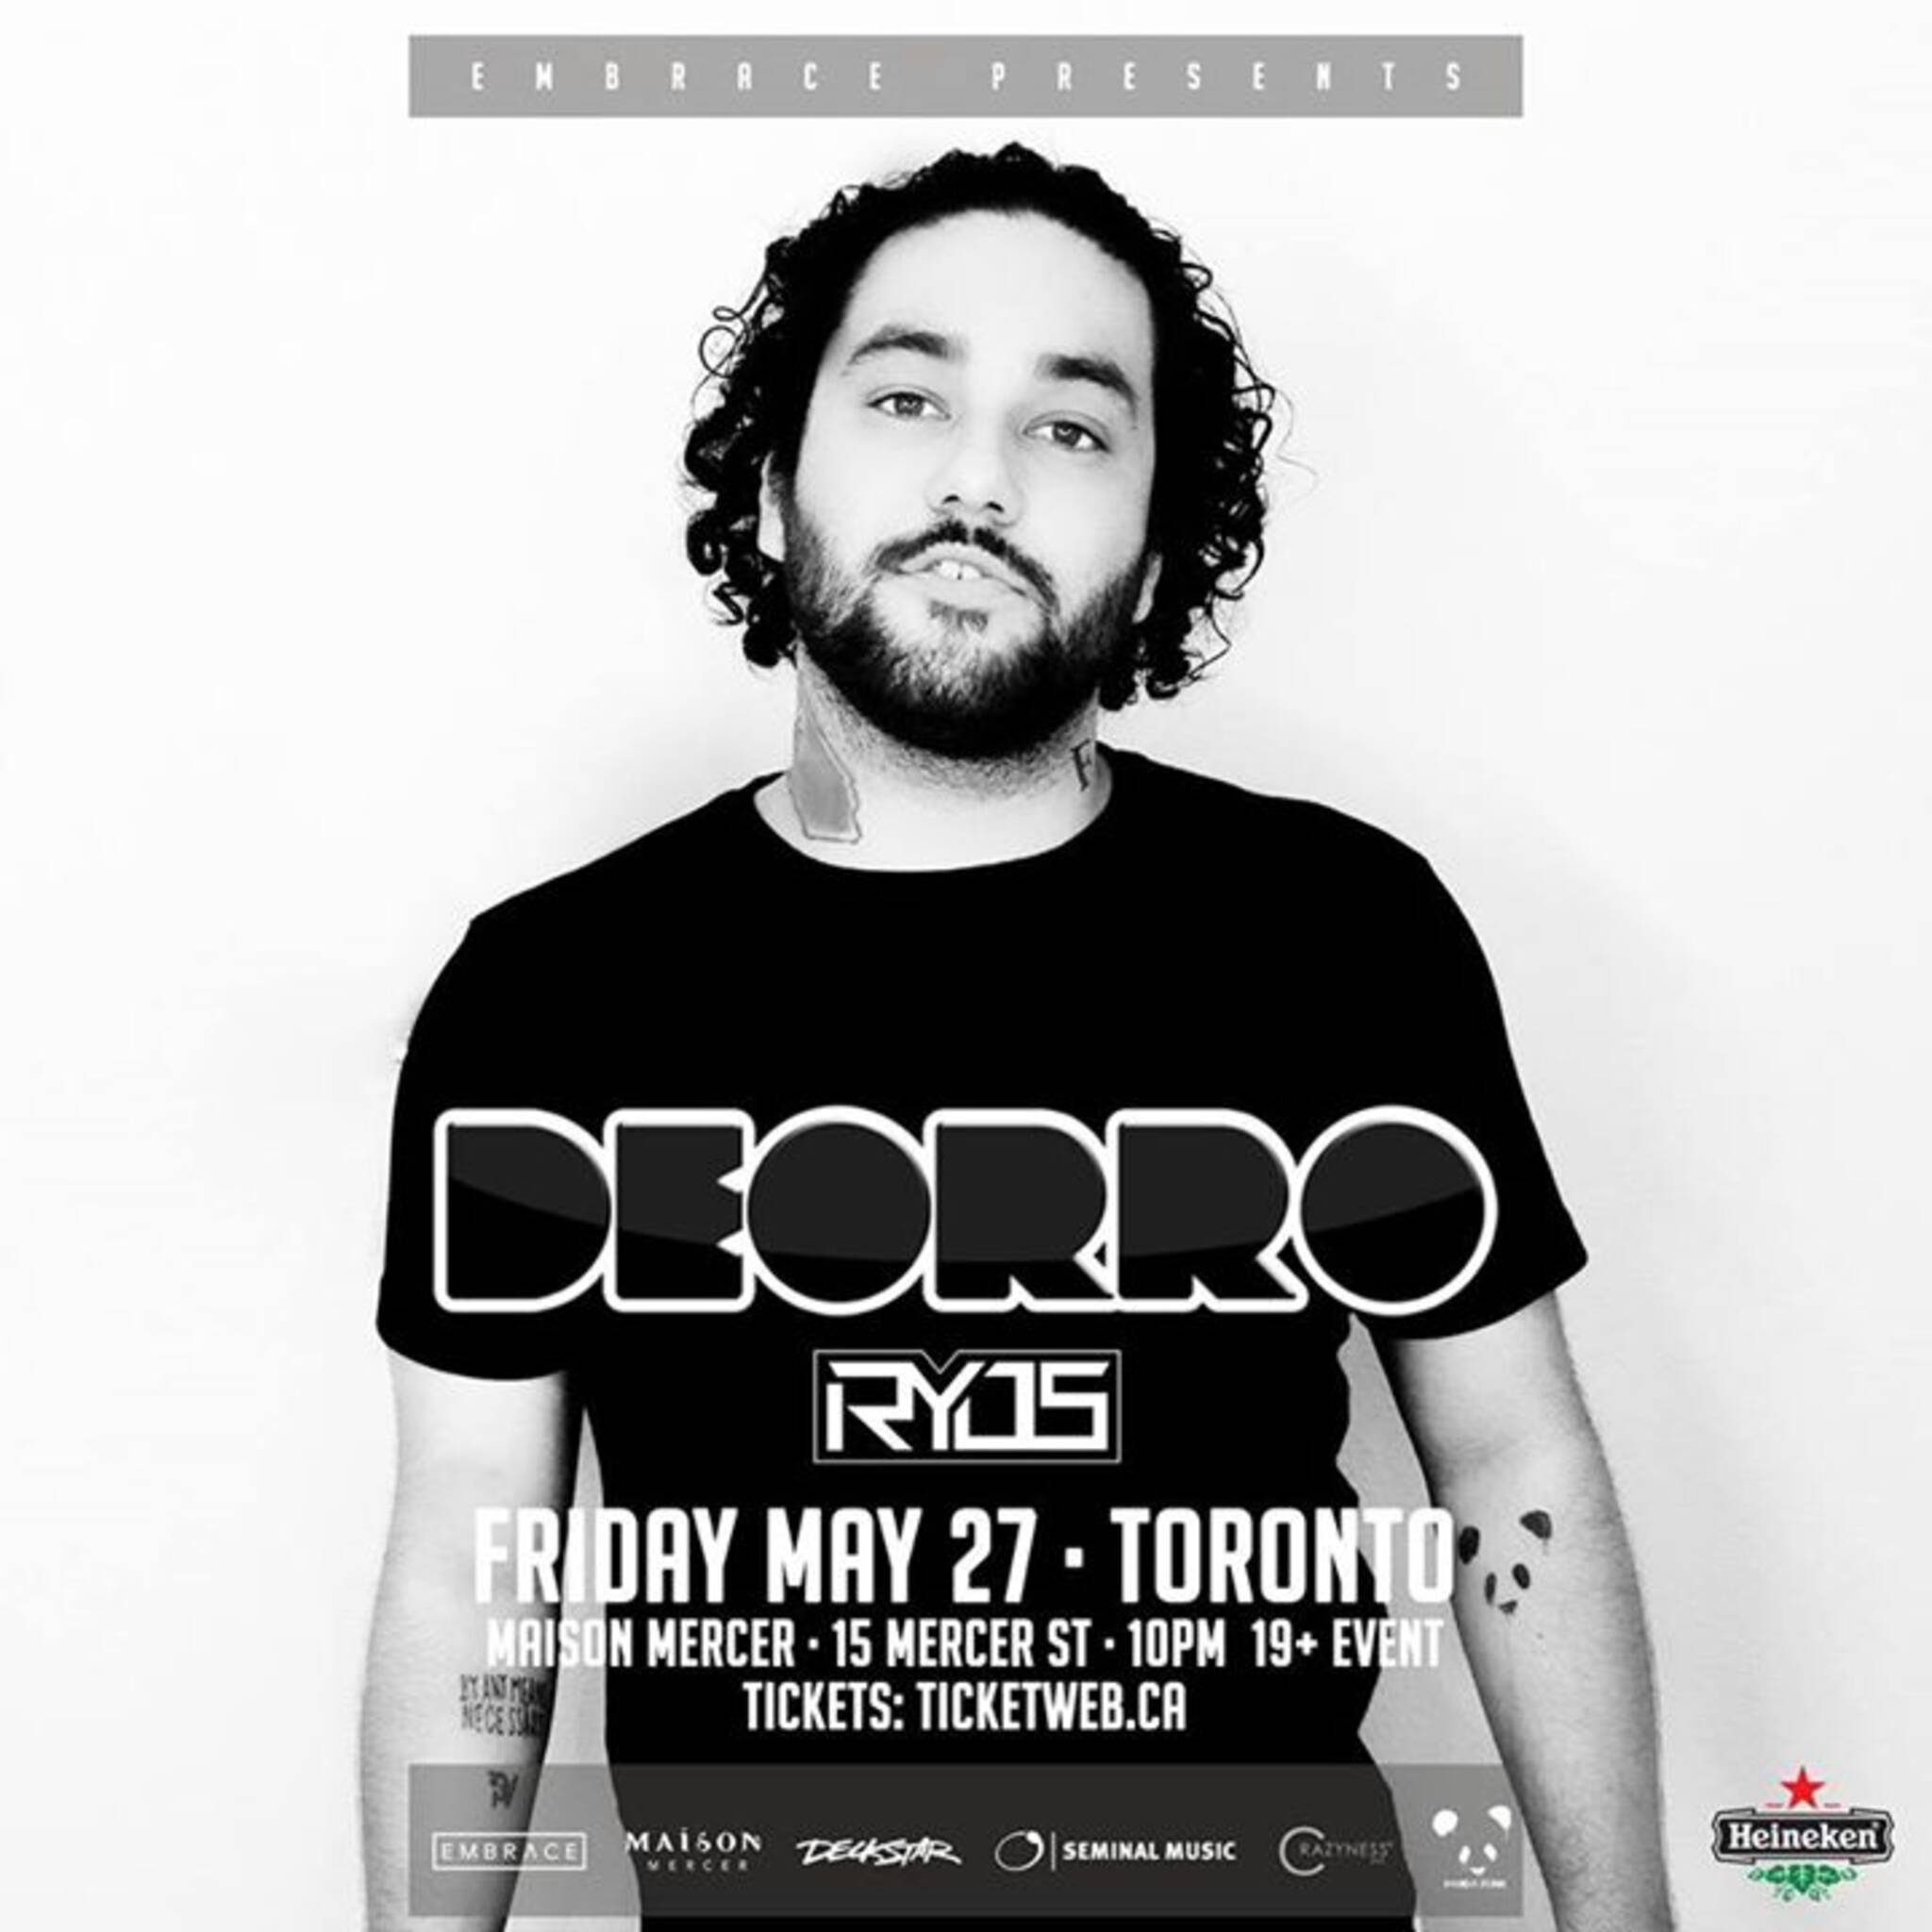 DEORRO at Maison Mercer May 27th